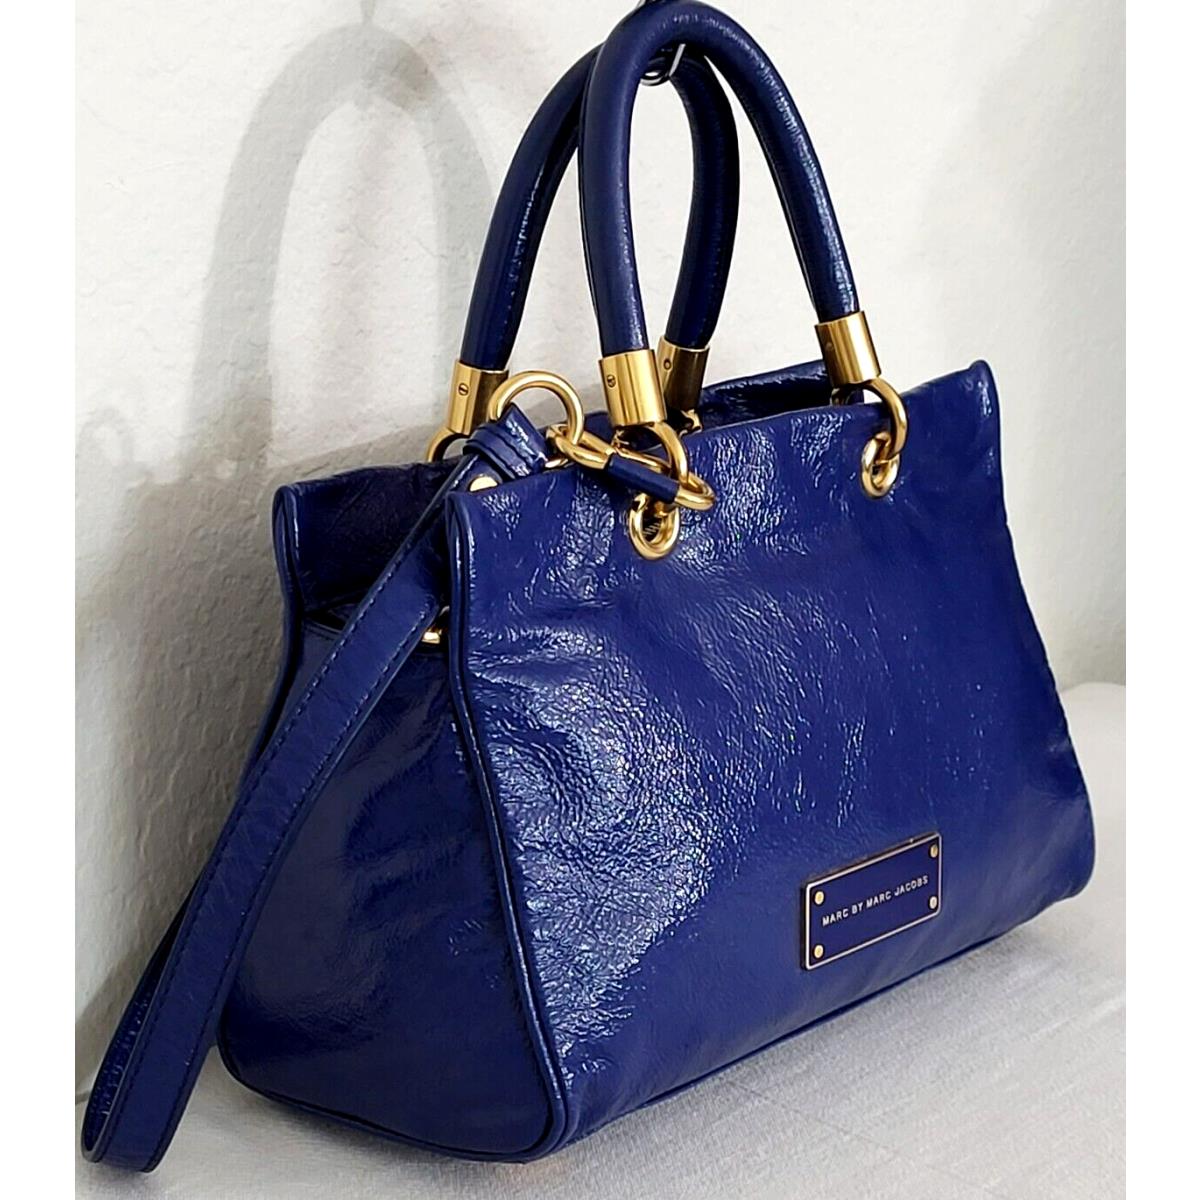 Marc Jacobs  bag  TOO HOT HANDLE - Blue Handle/Strap, Gold Hardware, BRIGHT ROYAL BLUE Exterior 2